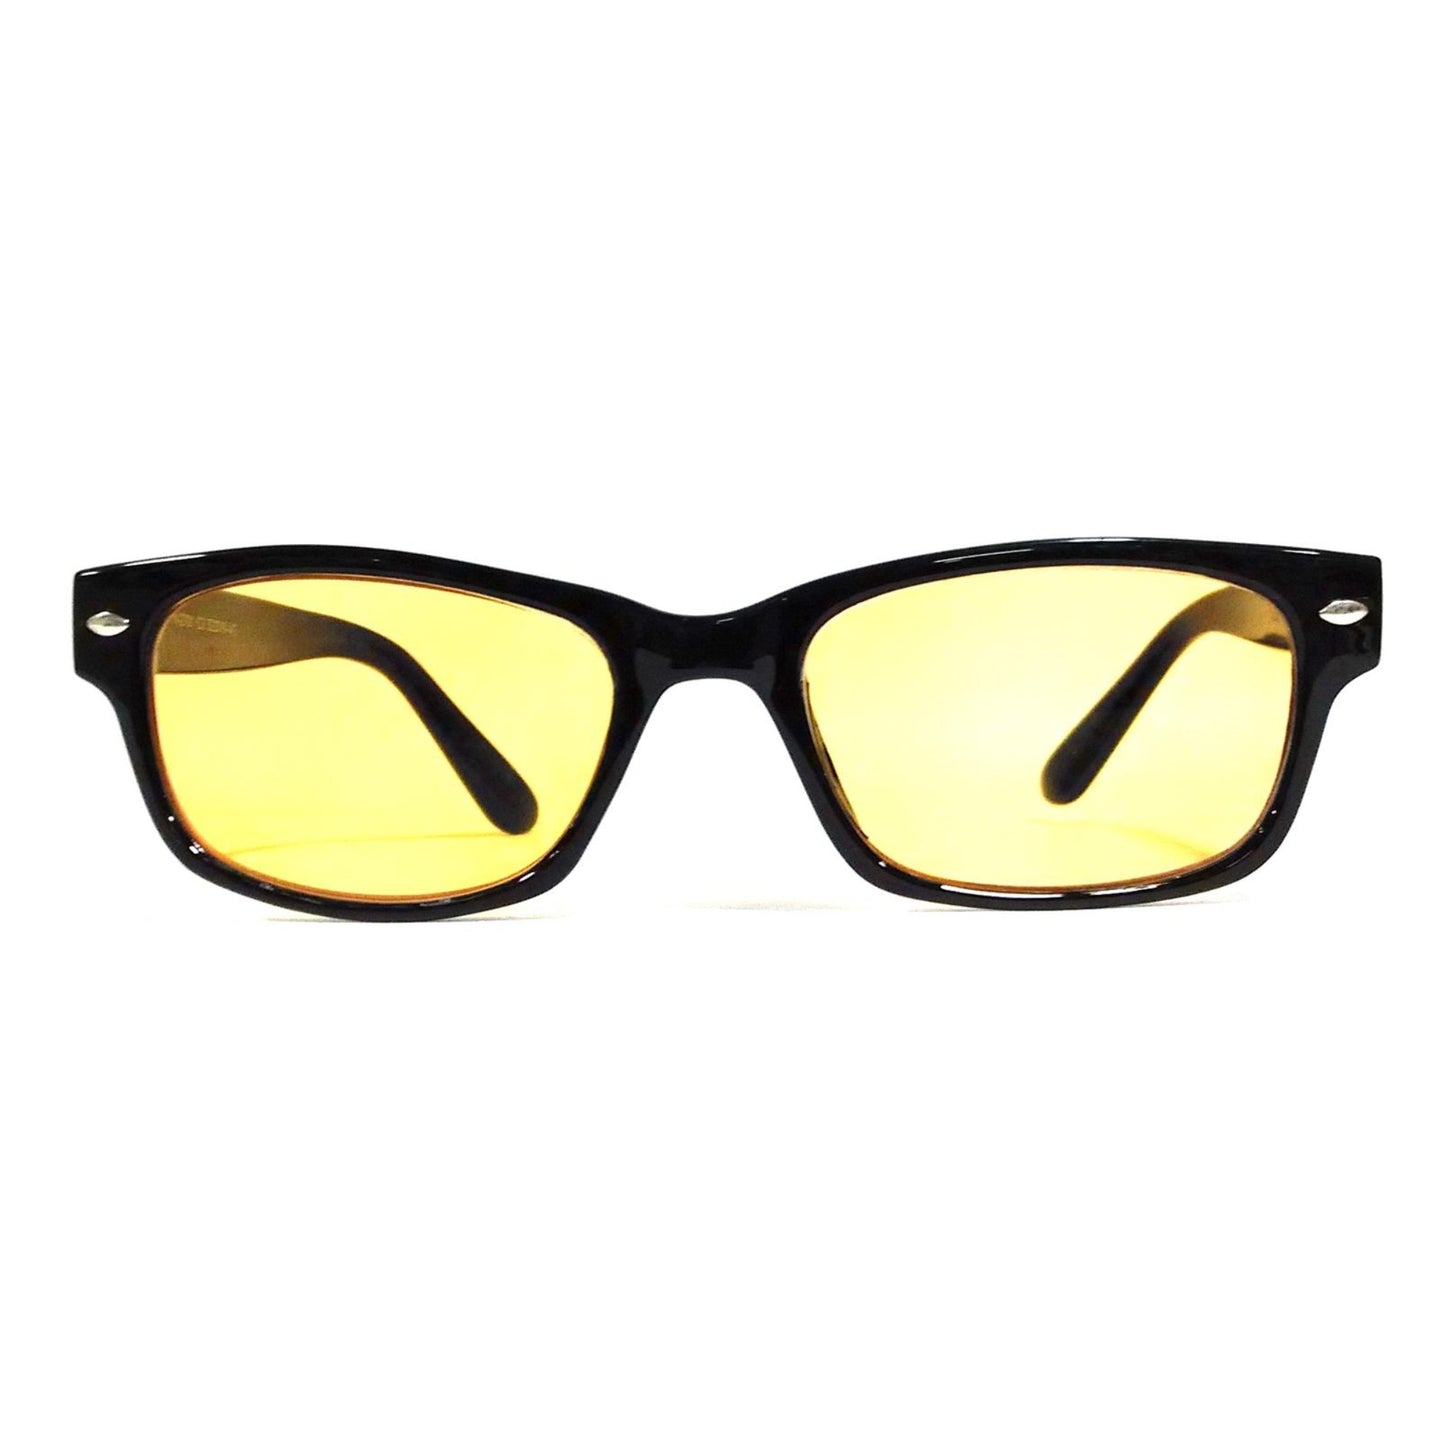 Fashion Rectangle Night Driving Glasses for Men and Women with Anti Glare  Coating